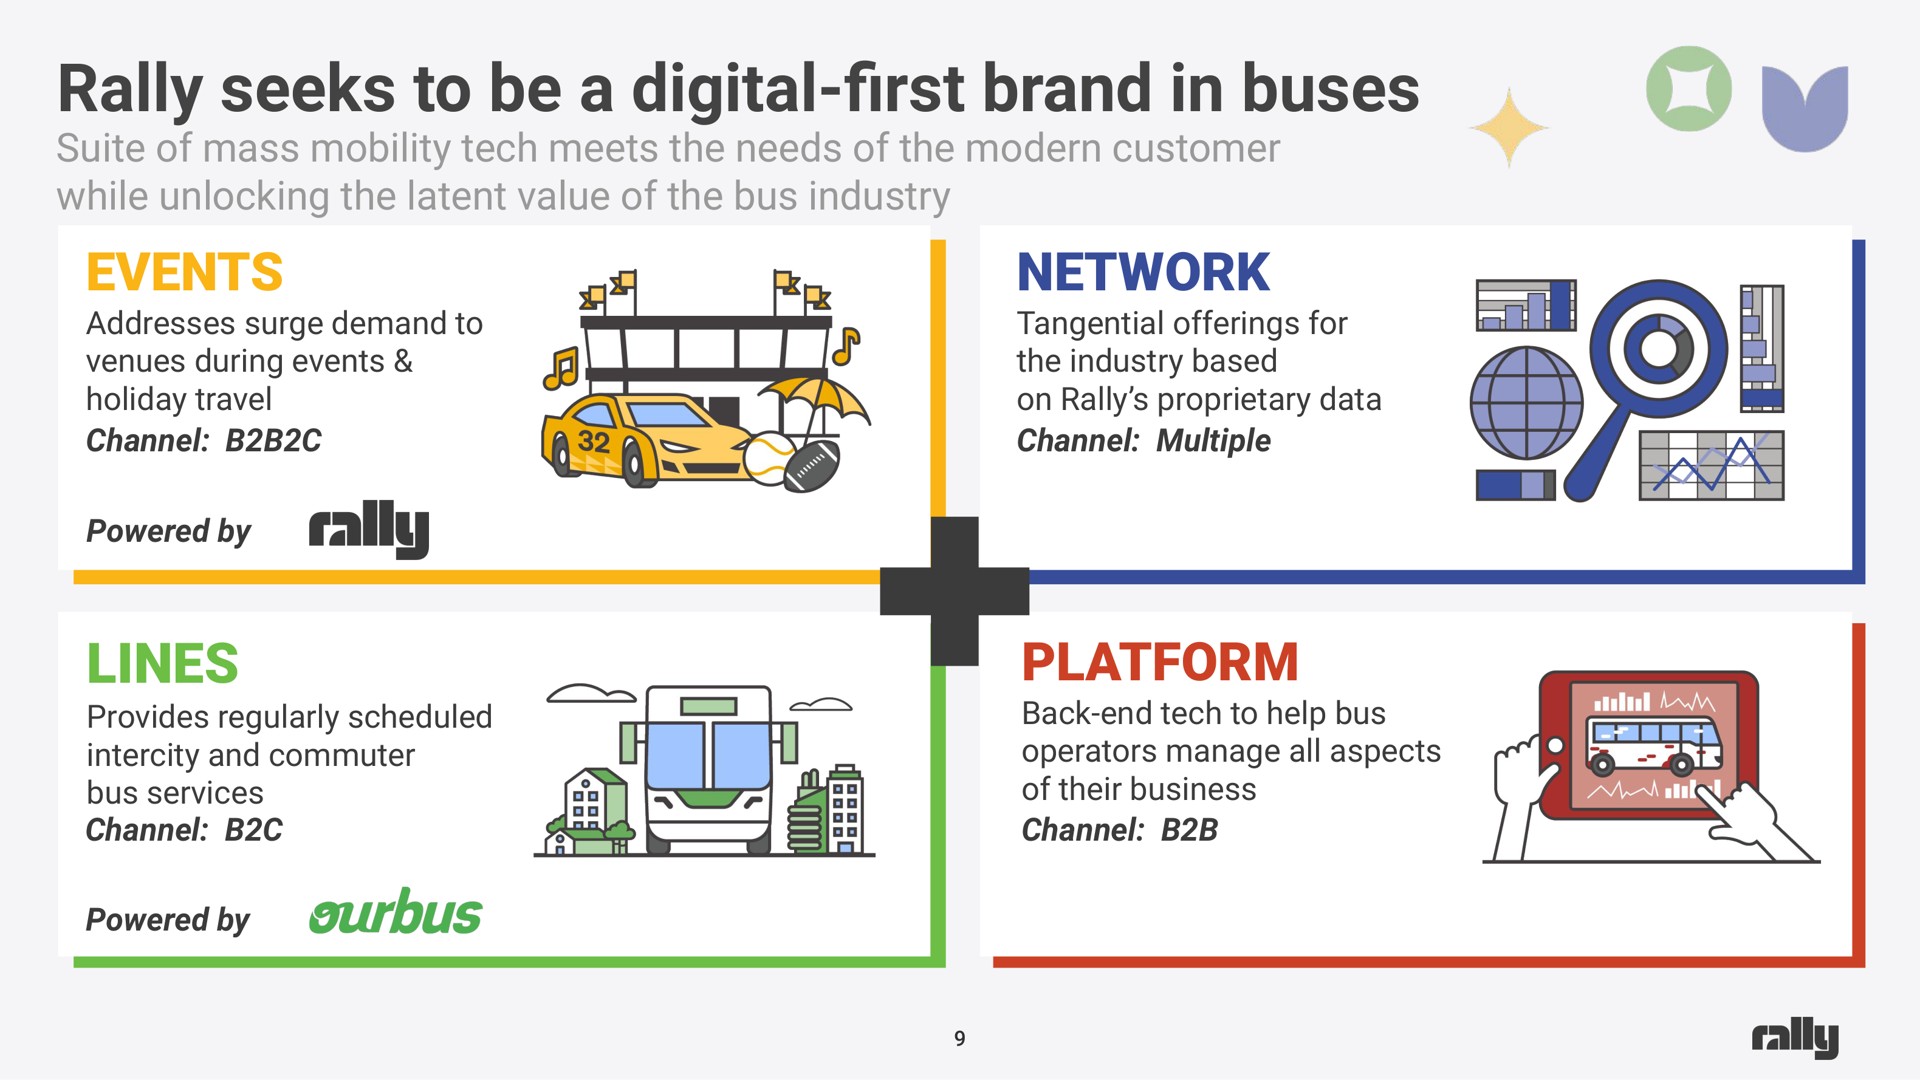 rally seeks to be a digital brand in buses events lines network platform digital first | Rally